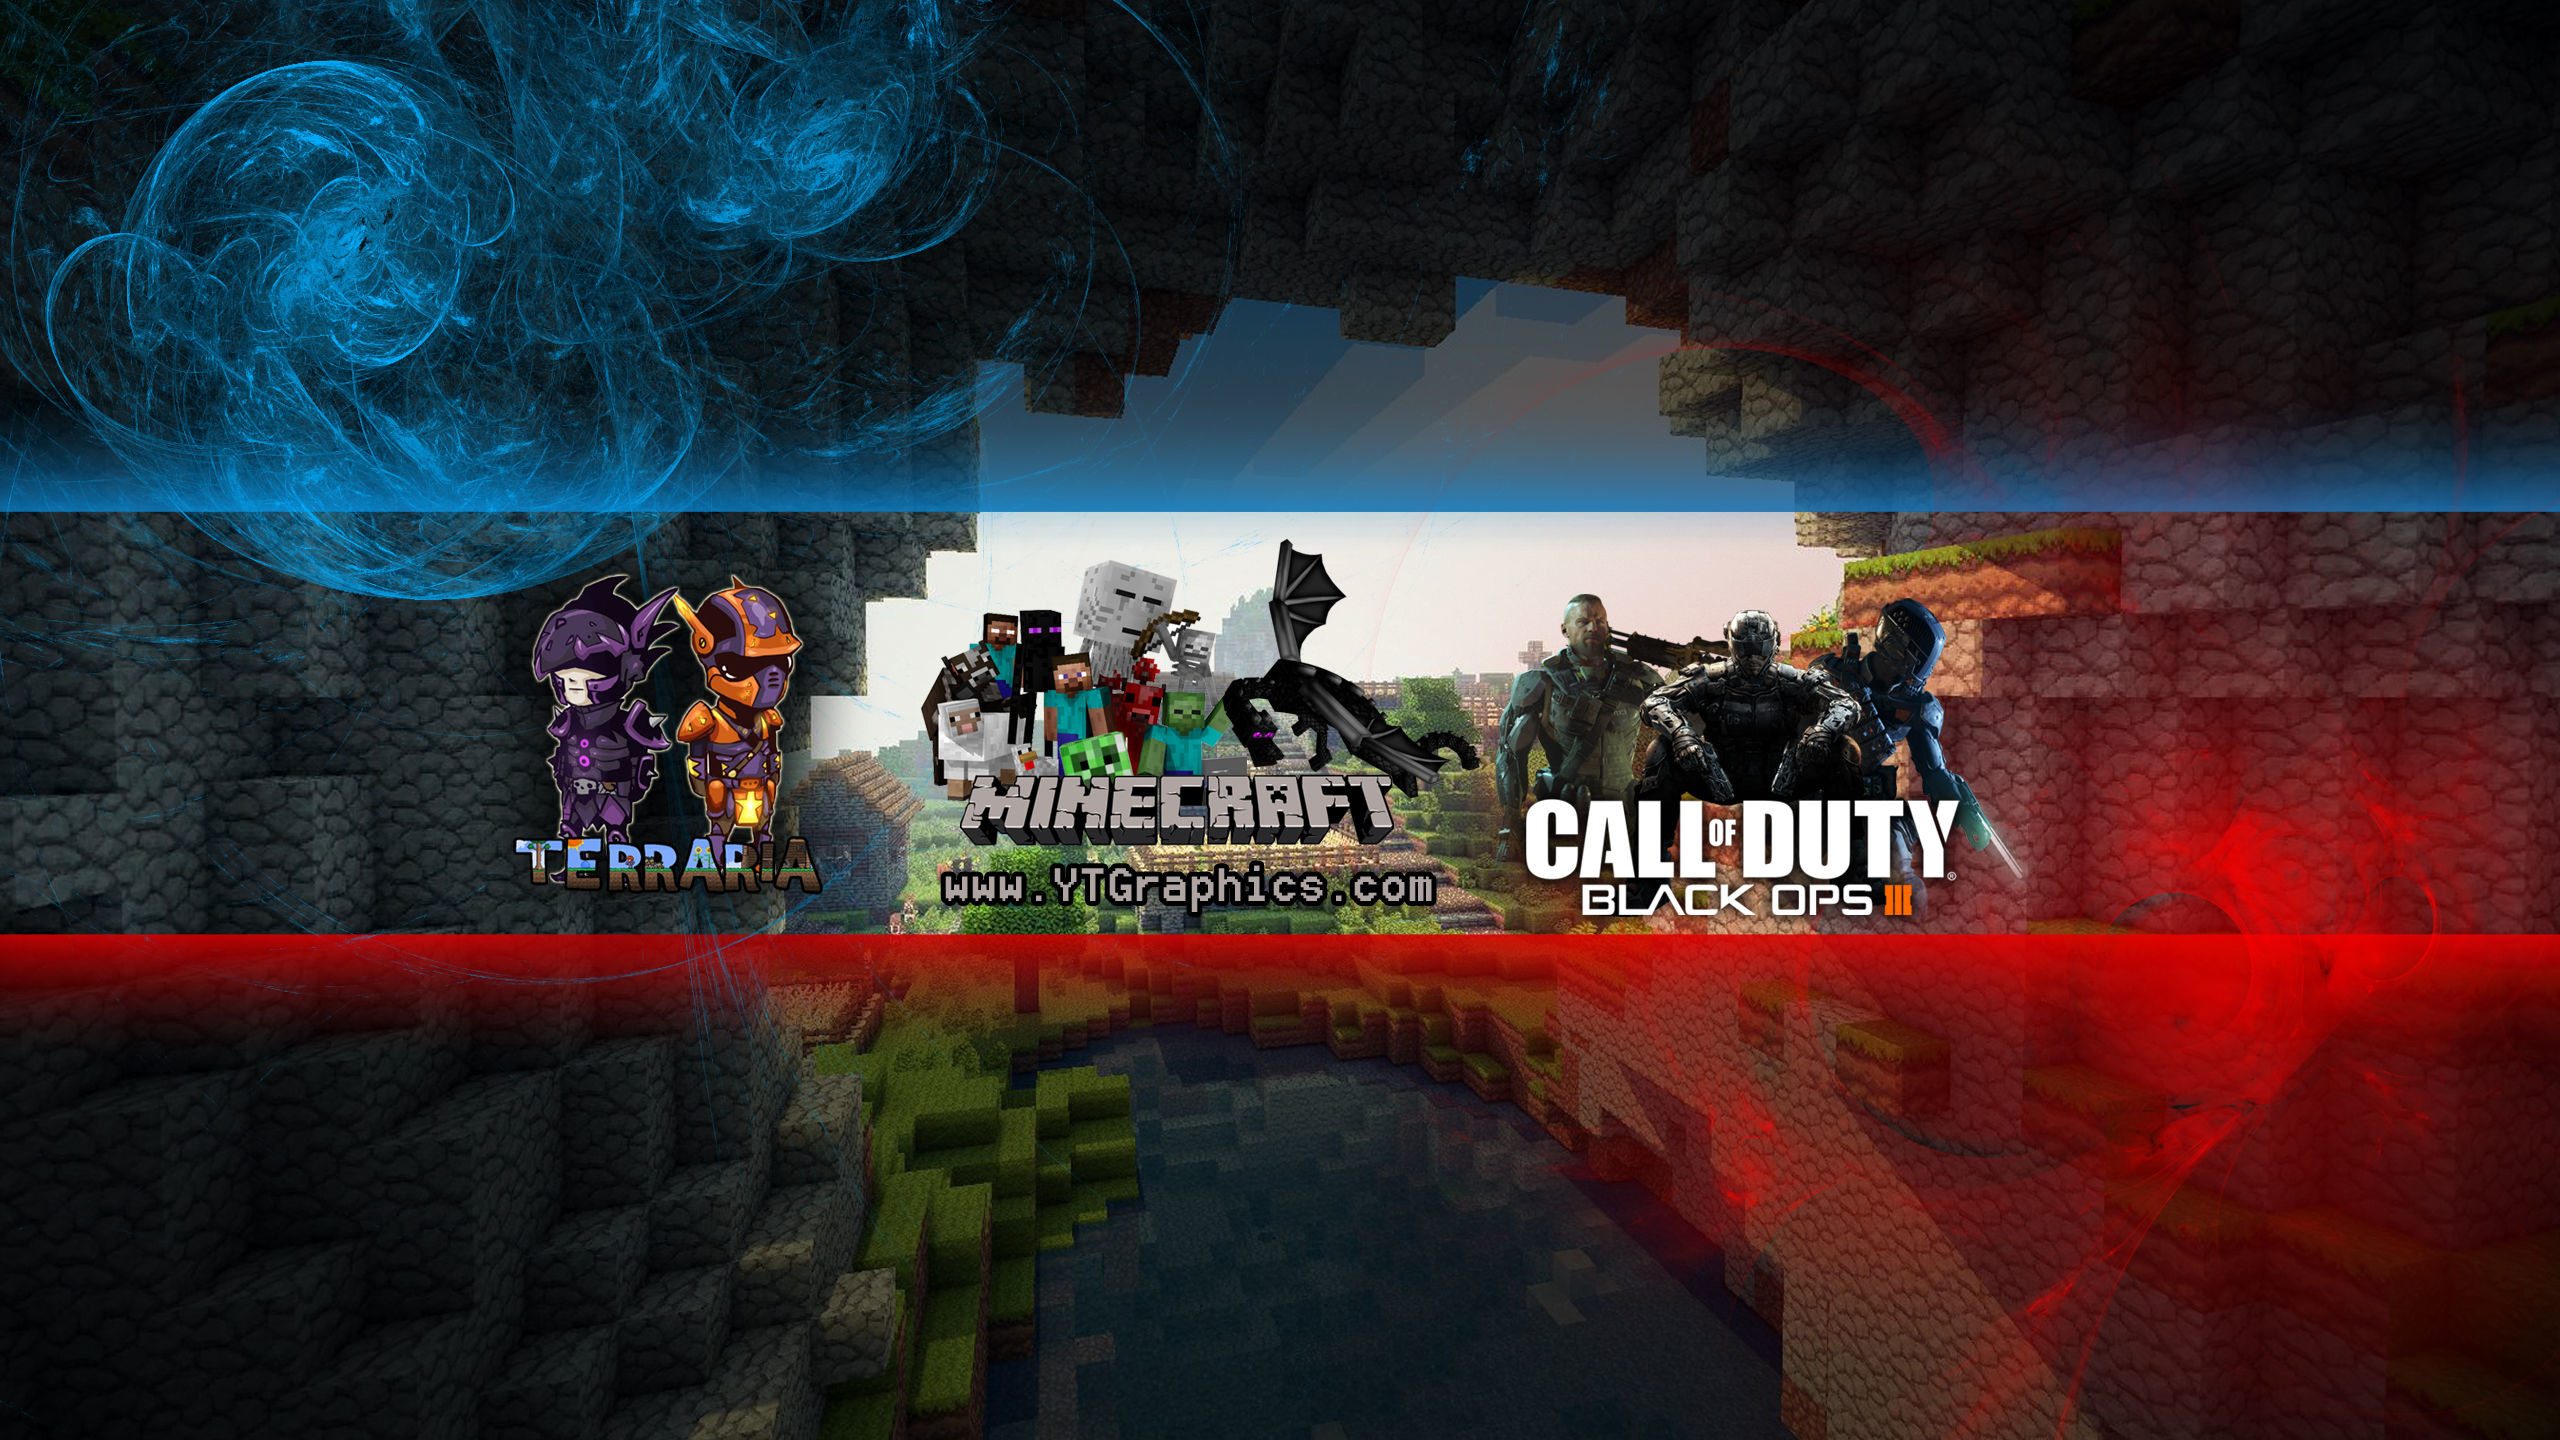 2560x1440 FREE YouTube Banner: "MINECRAFT" Channel Art - YouTube